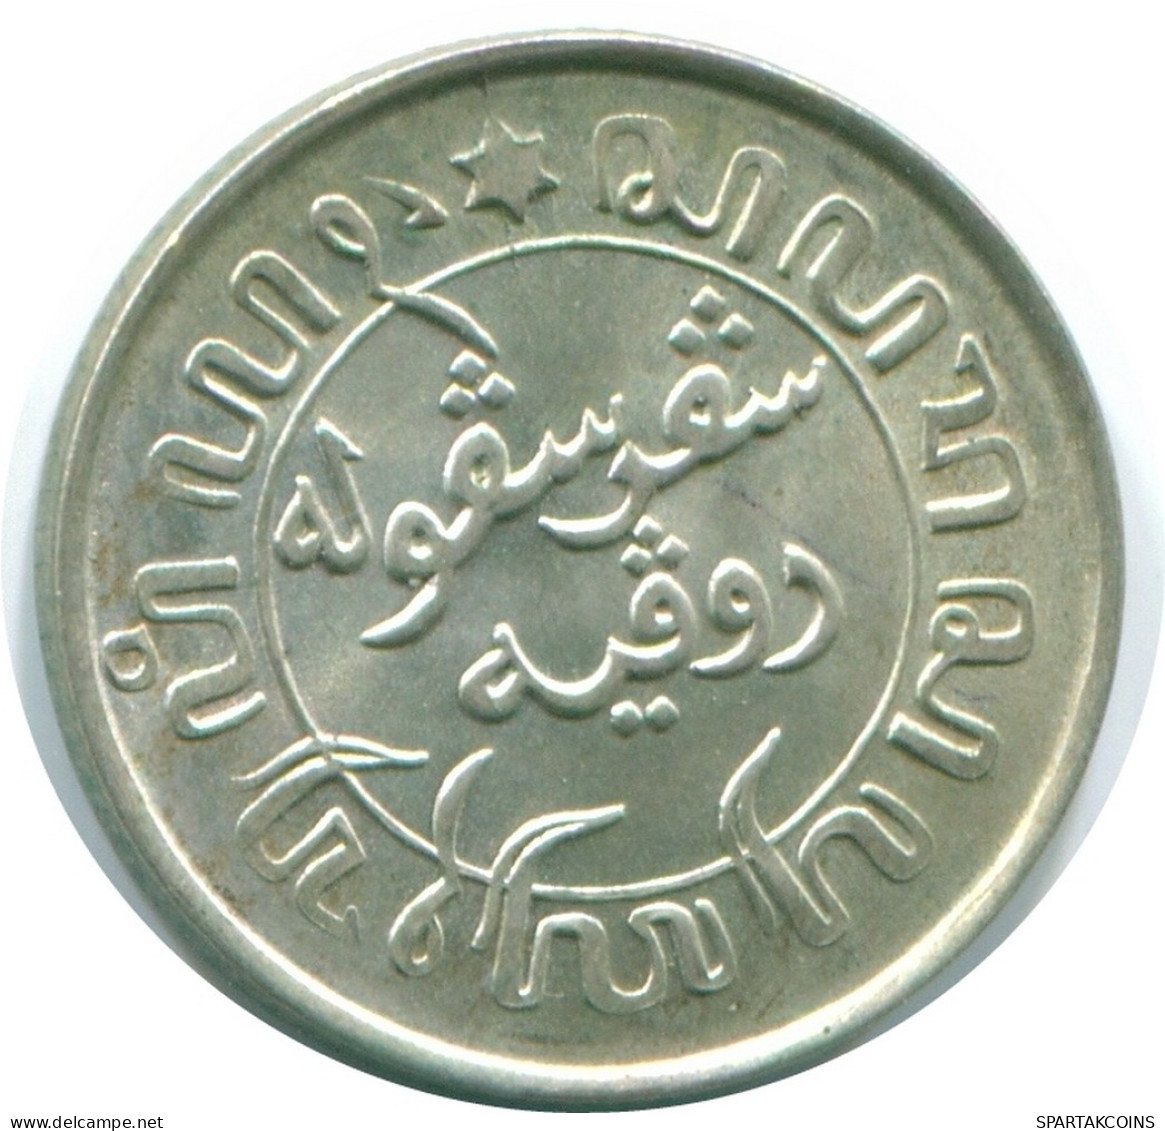 1/10 GULDEN 1941 S NETHERLANDS EAST INDIES SILVER Colonial Coin #NL13803.3.U.A - Dutch East Indies